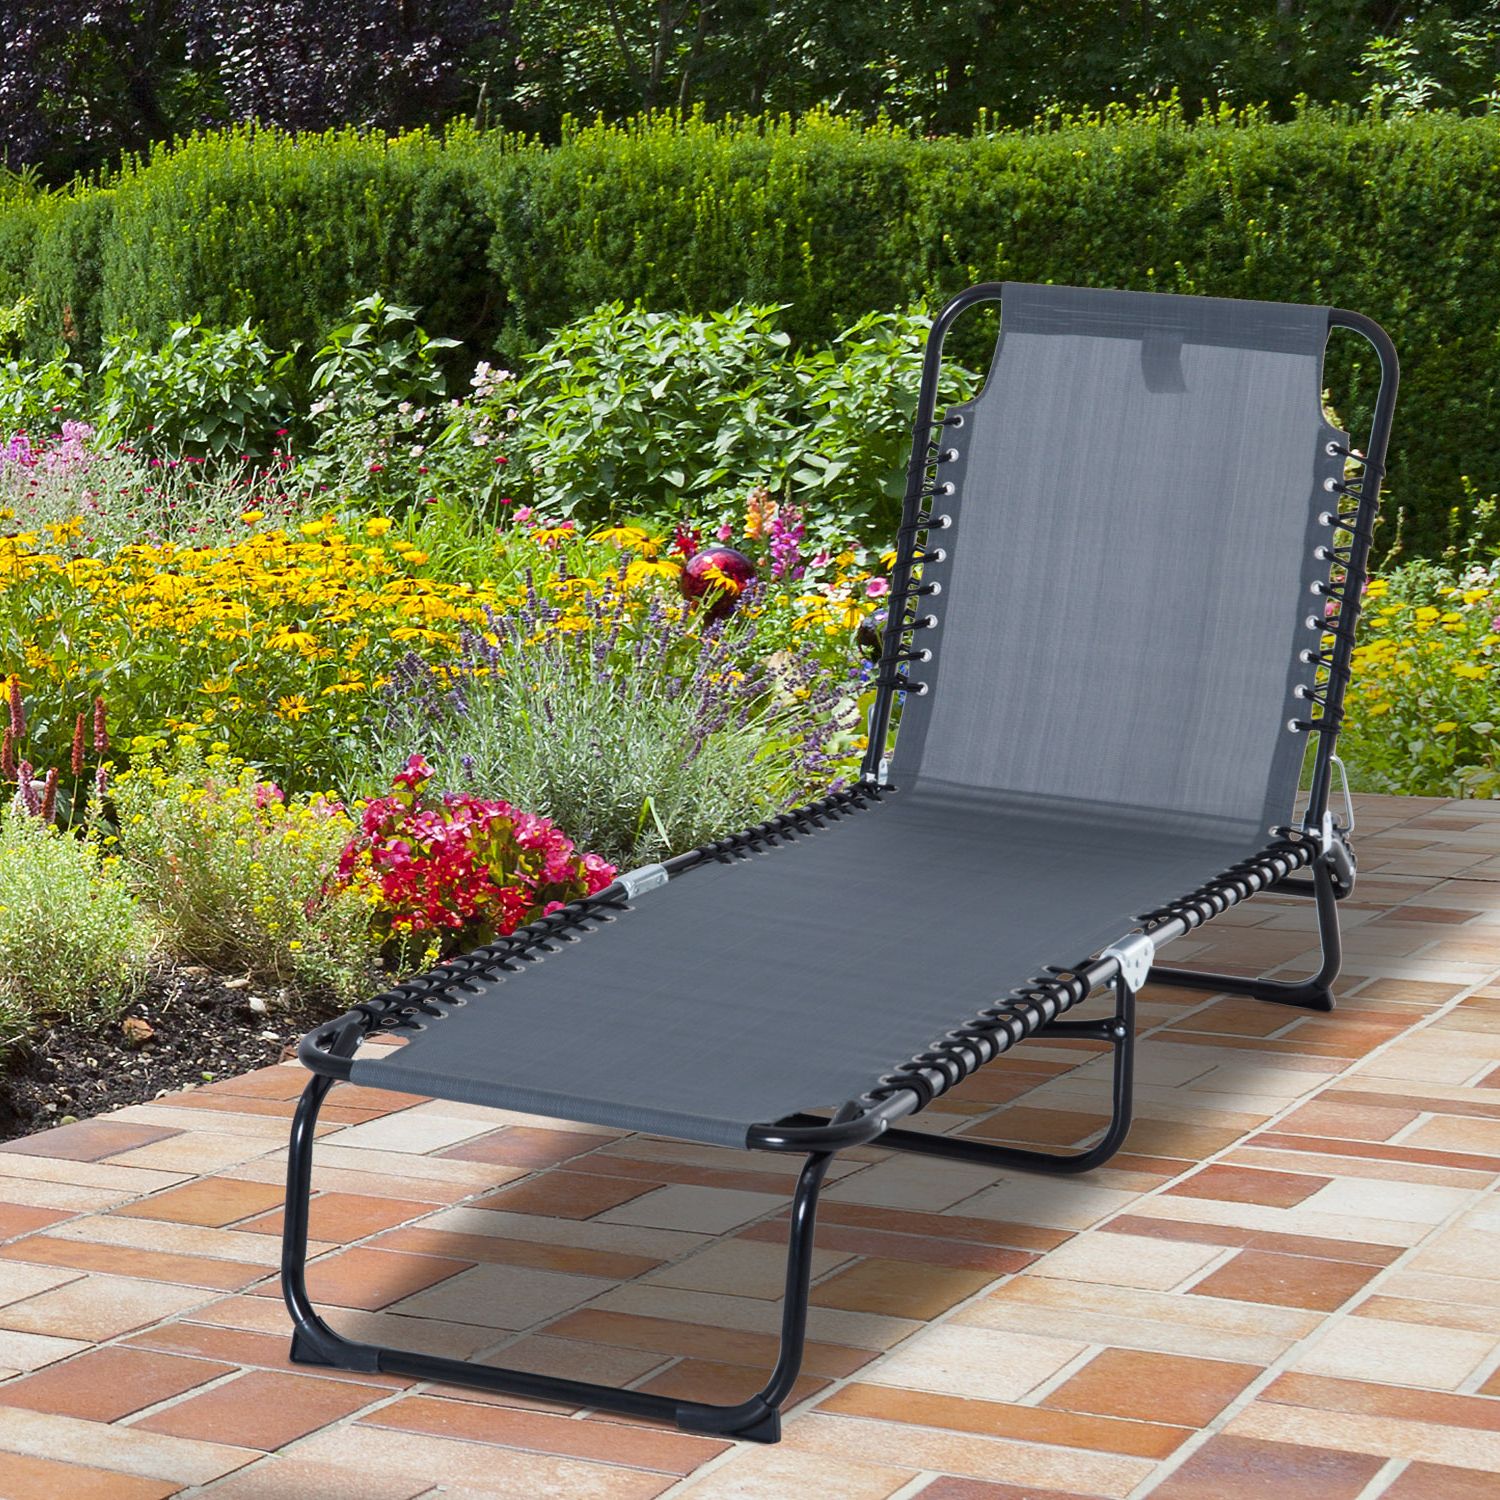 Current Details About 3 Position Portable Reclining Beach Chaise Lounge Adjustable  Sleeping Gray Intended For Portable Reclining Beach Chaise Lounge Folding Chairs (View 25 of 25)